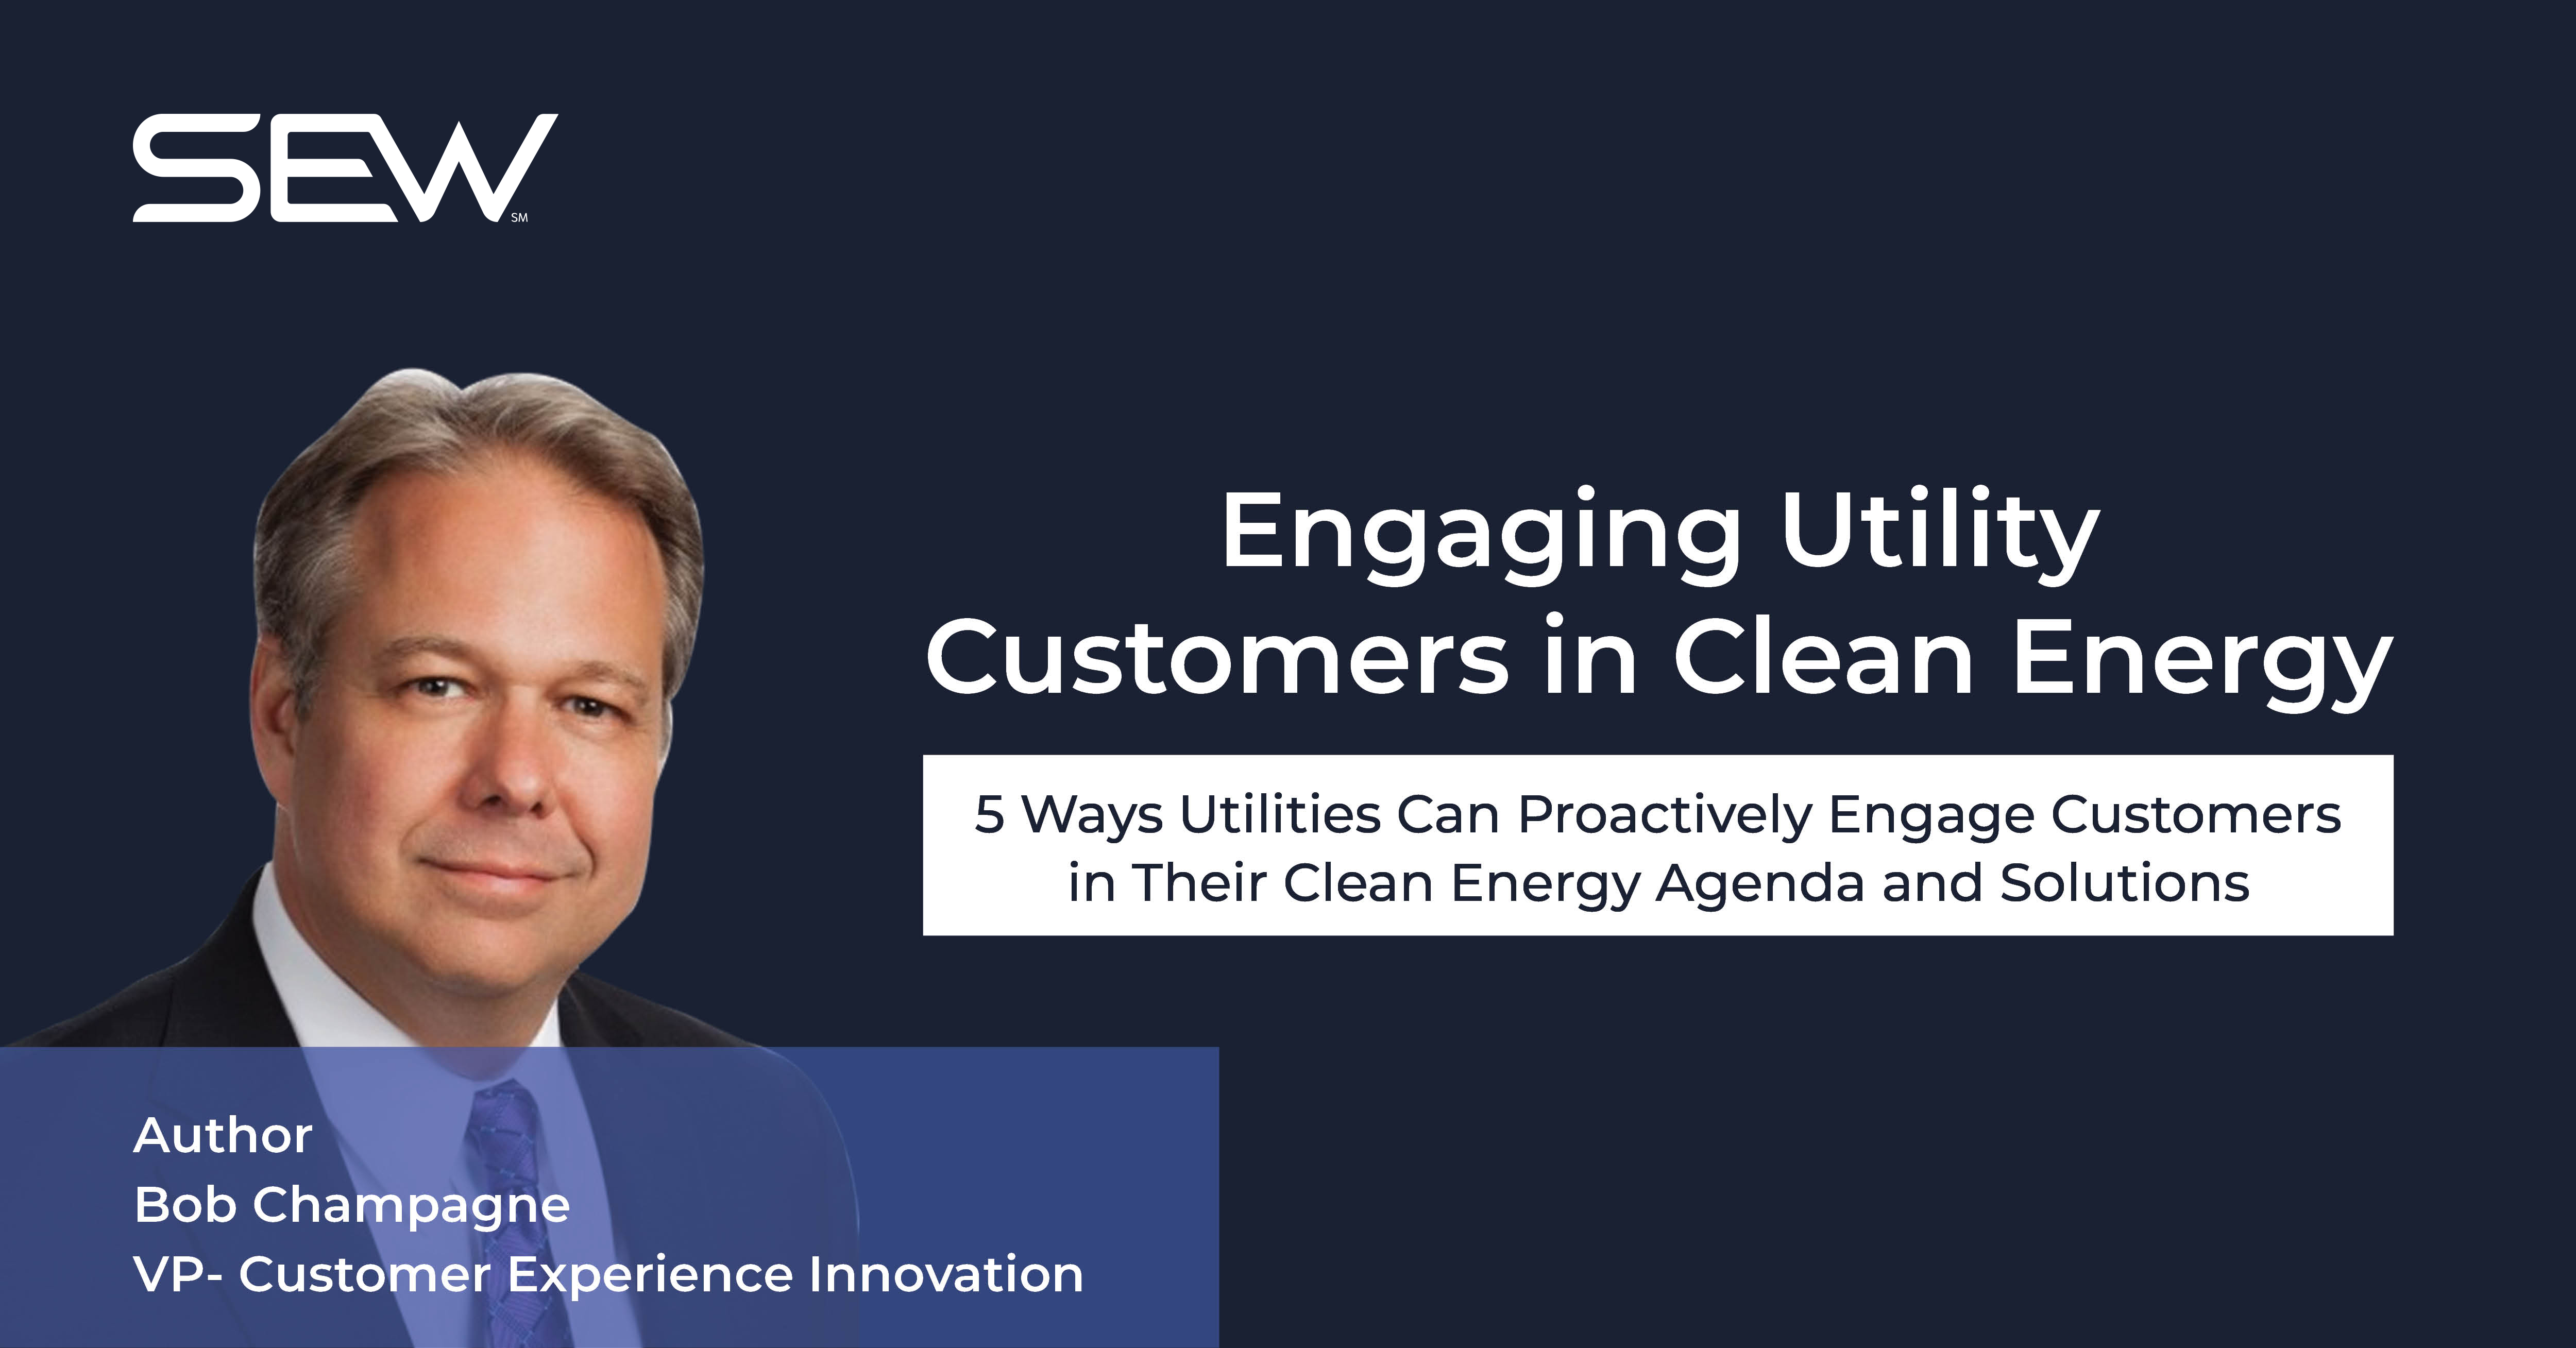 5 Ways Utilities Can Proactively Enroll Customers in Their Clean Energy Agenda